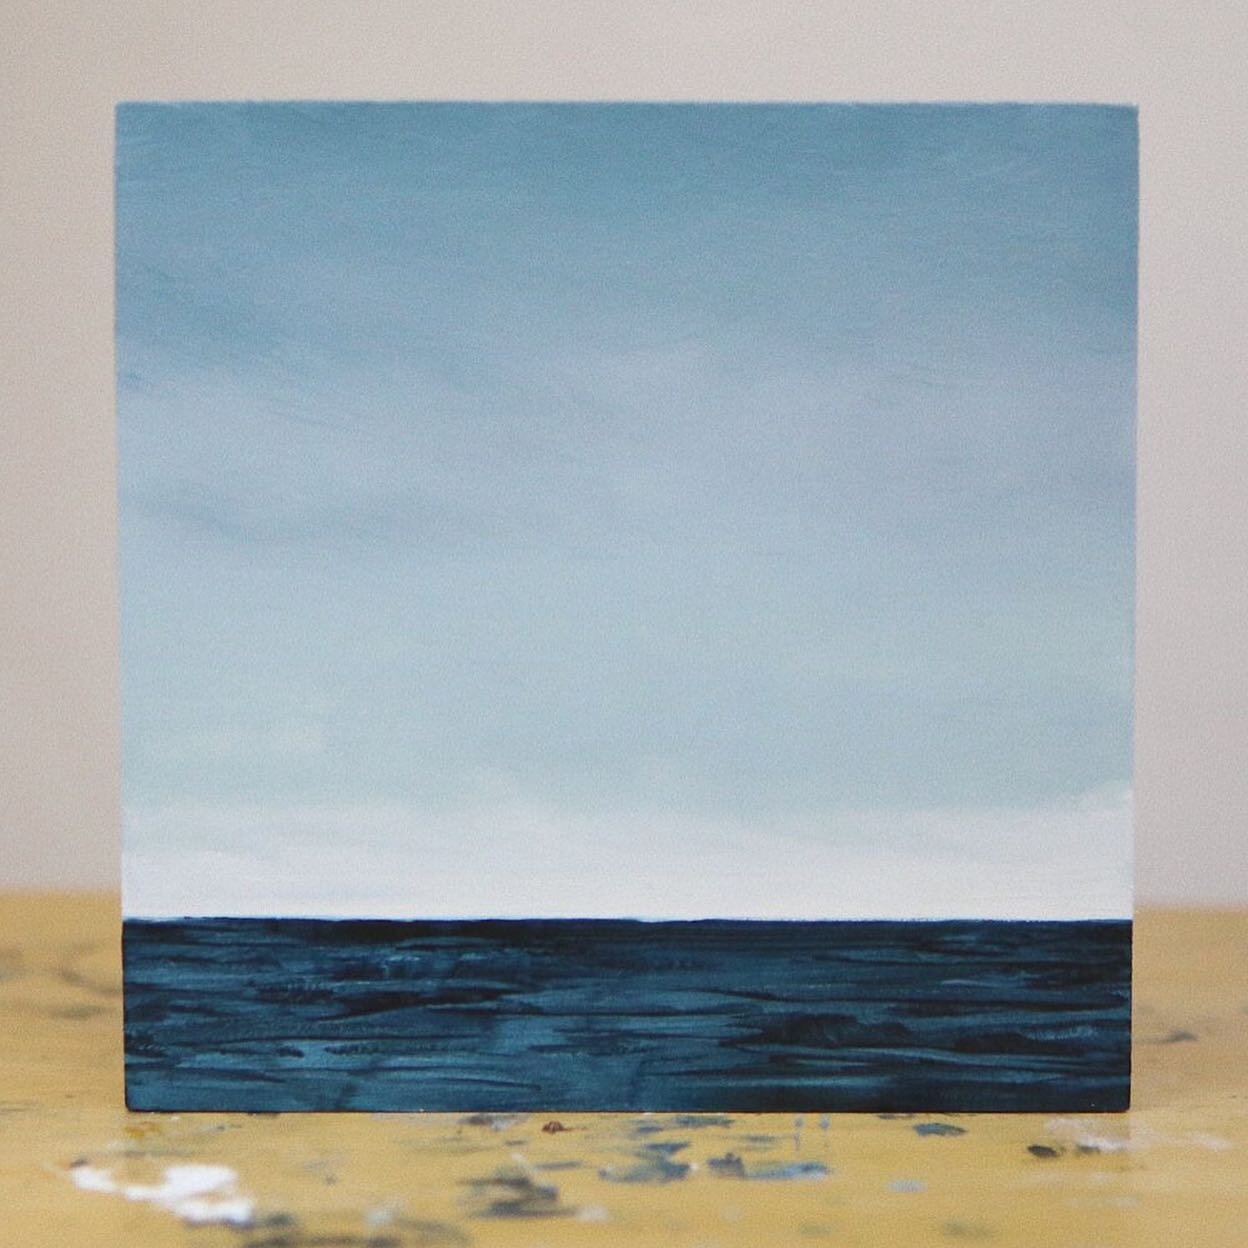 &ldquo;Lifted&rdquo; Seascape 65 - now available for sale through @6x6auction (closes this Friday at 2 PM PST)